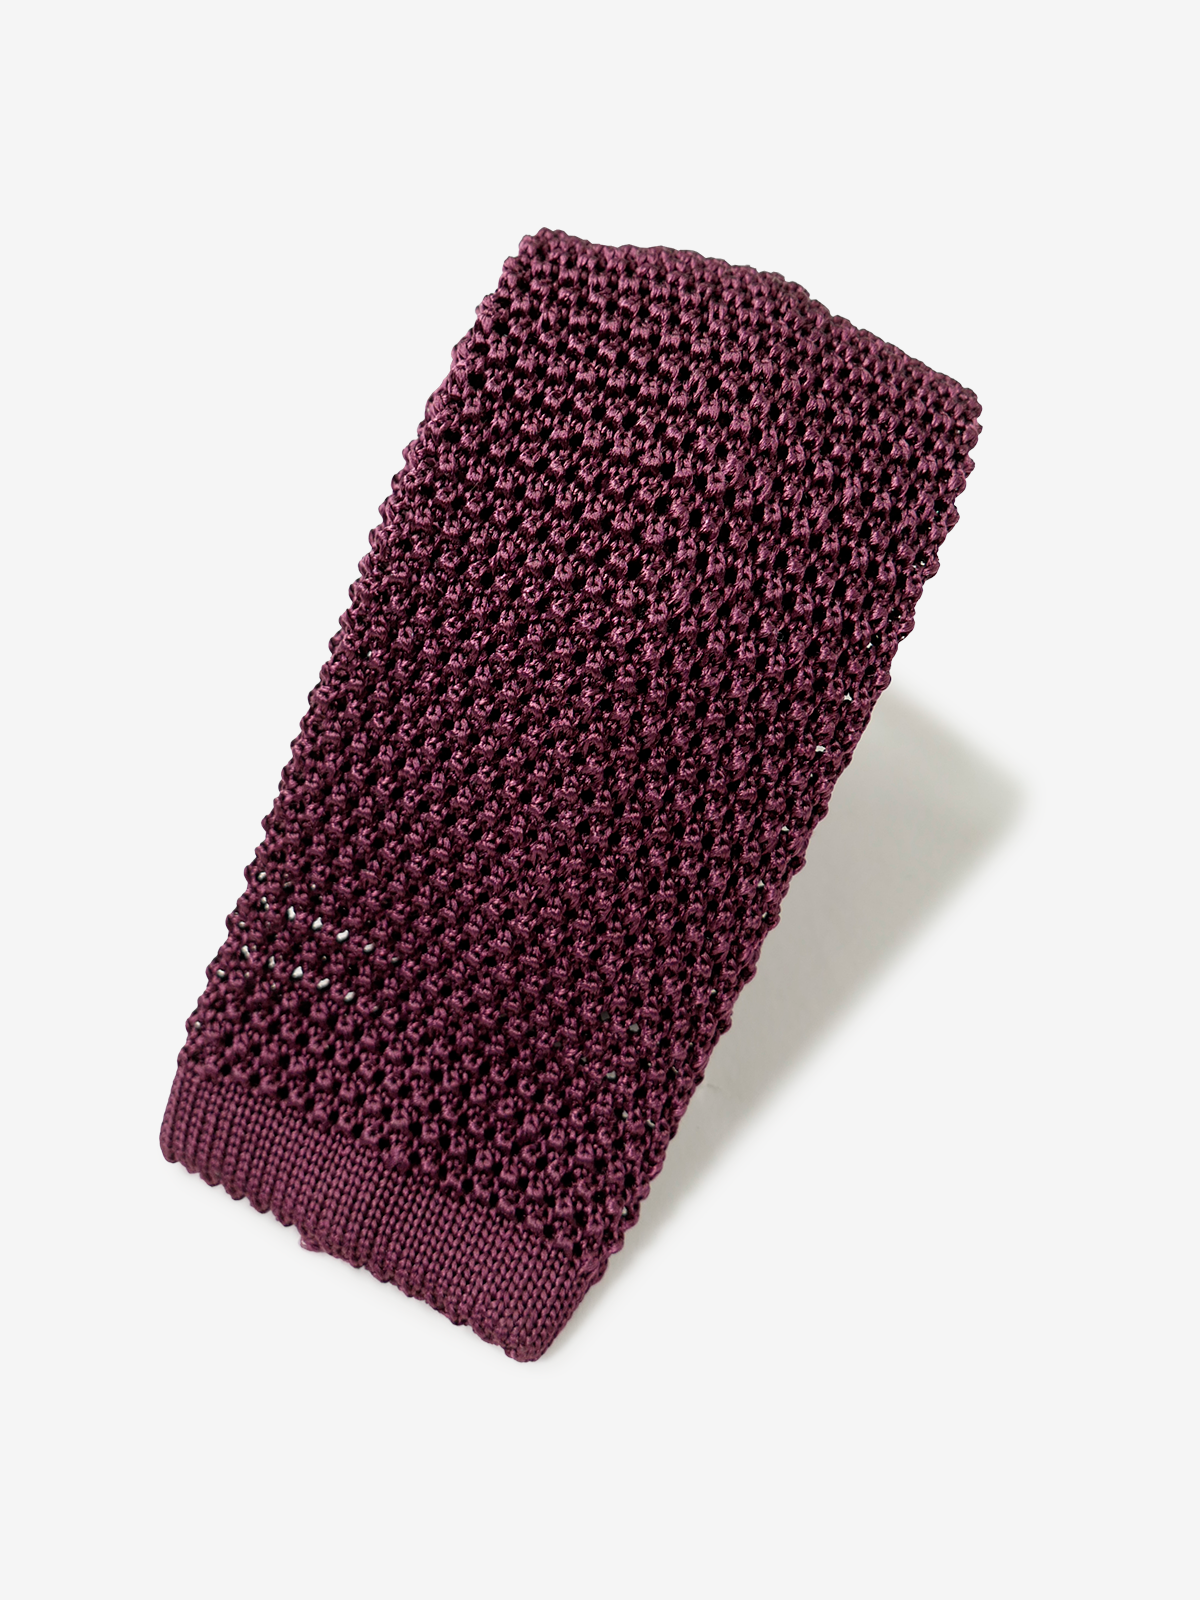 Knitted Tie｜ボルドー